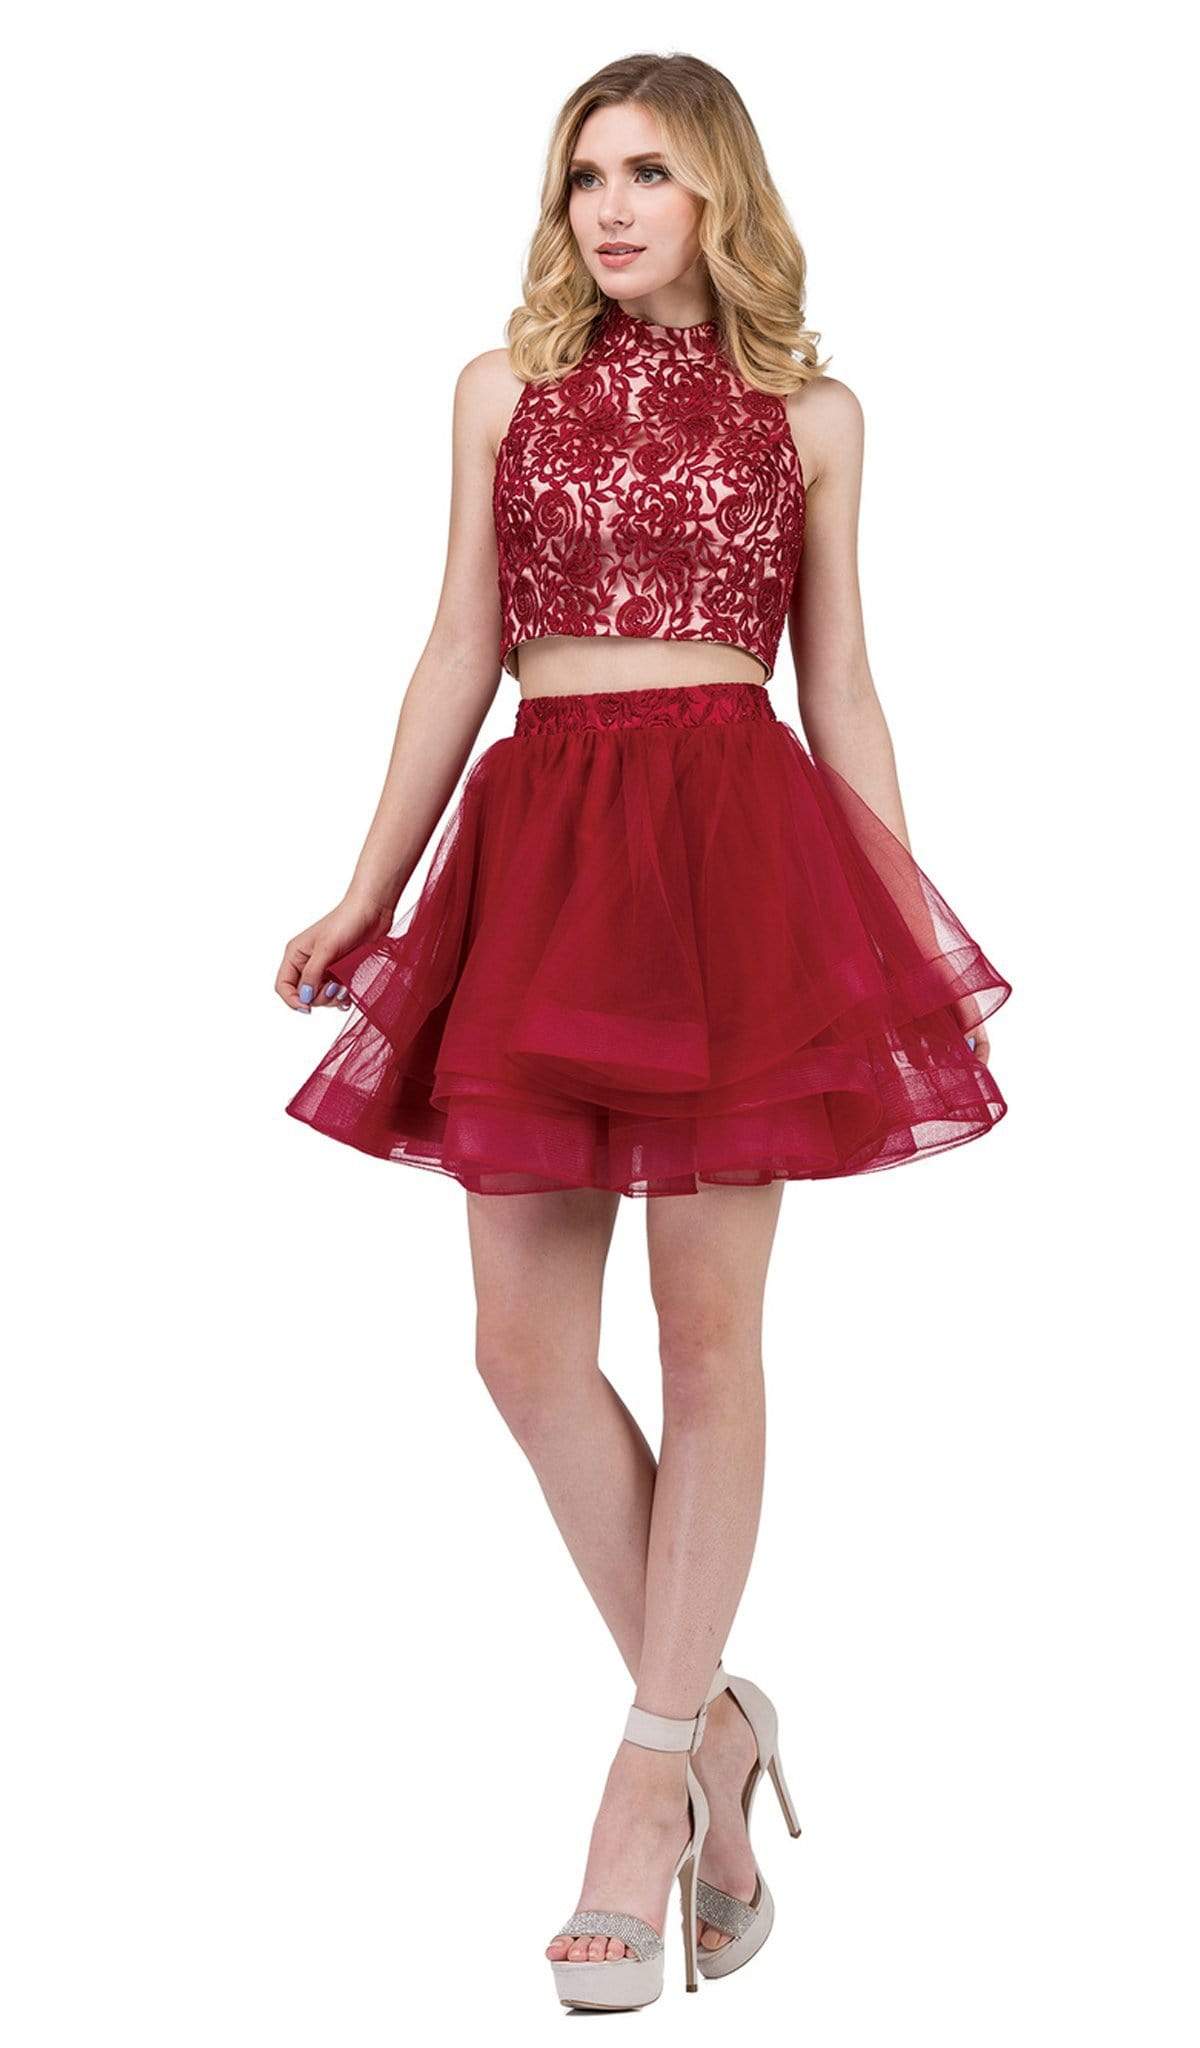 Dancing Queen - 3042 Two Piece Floral Embroidered Homecoming Dress